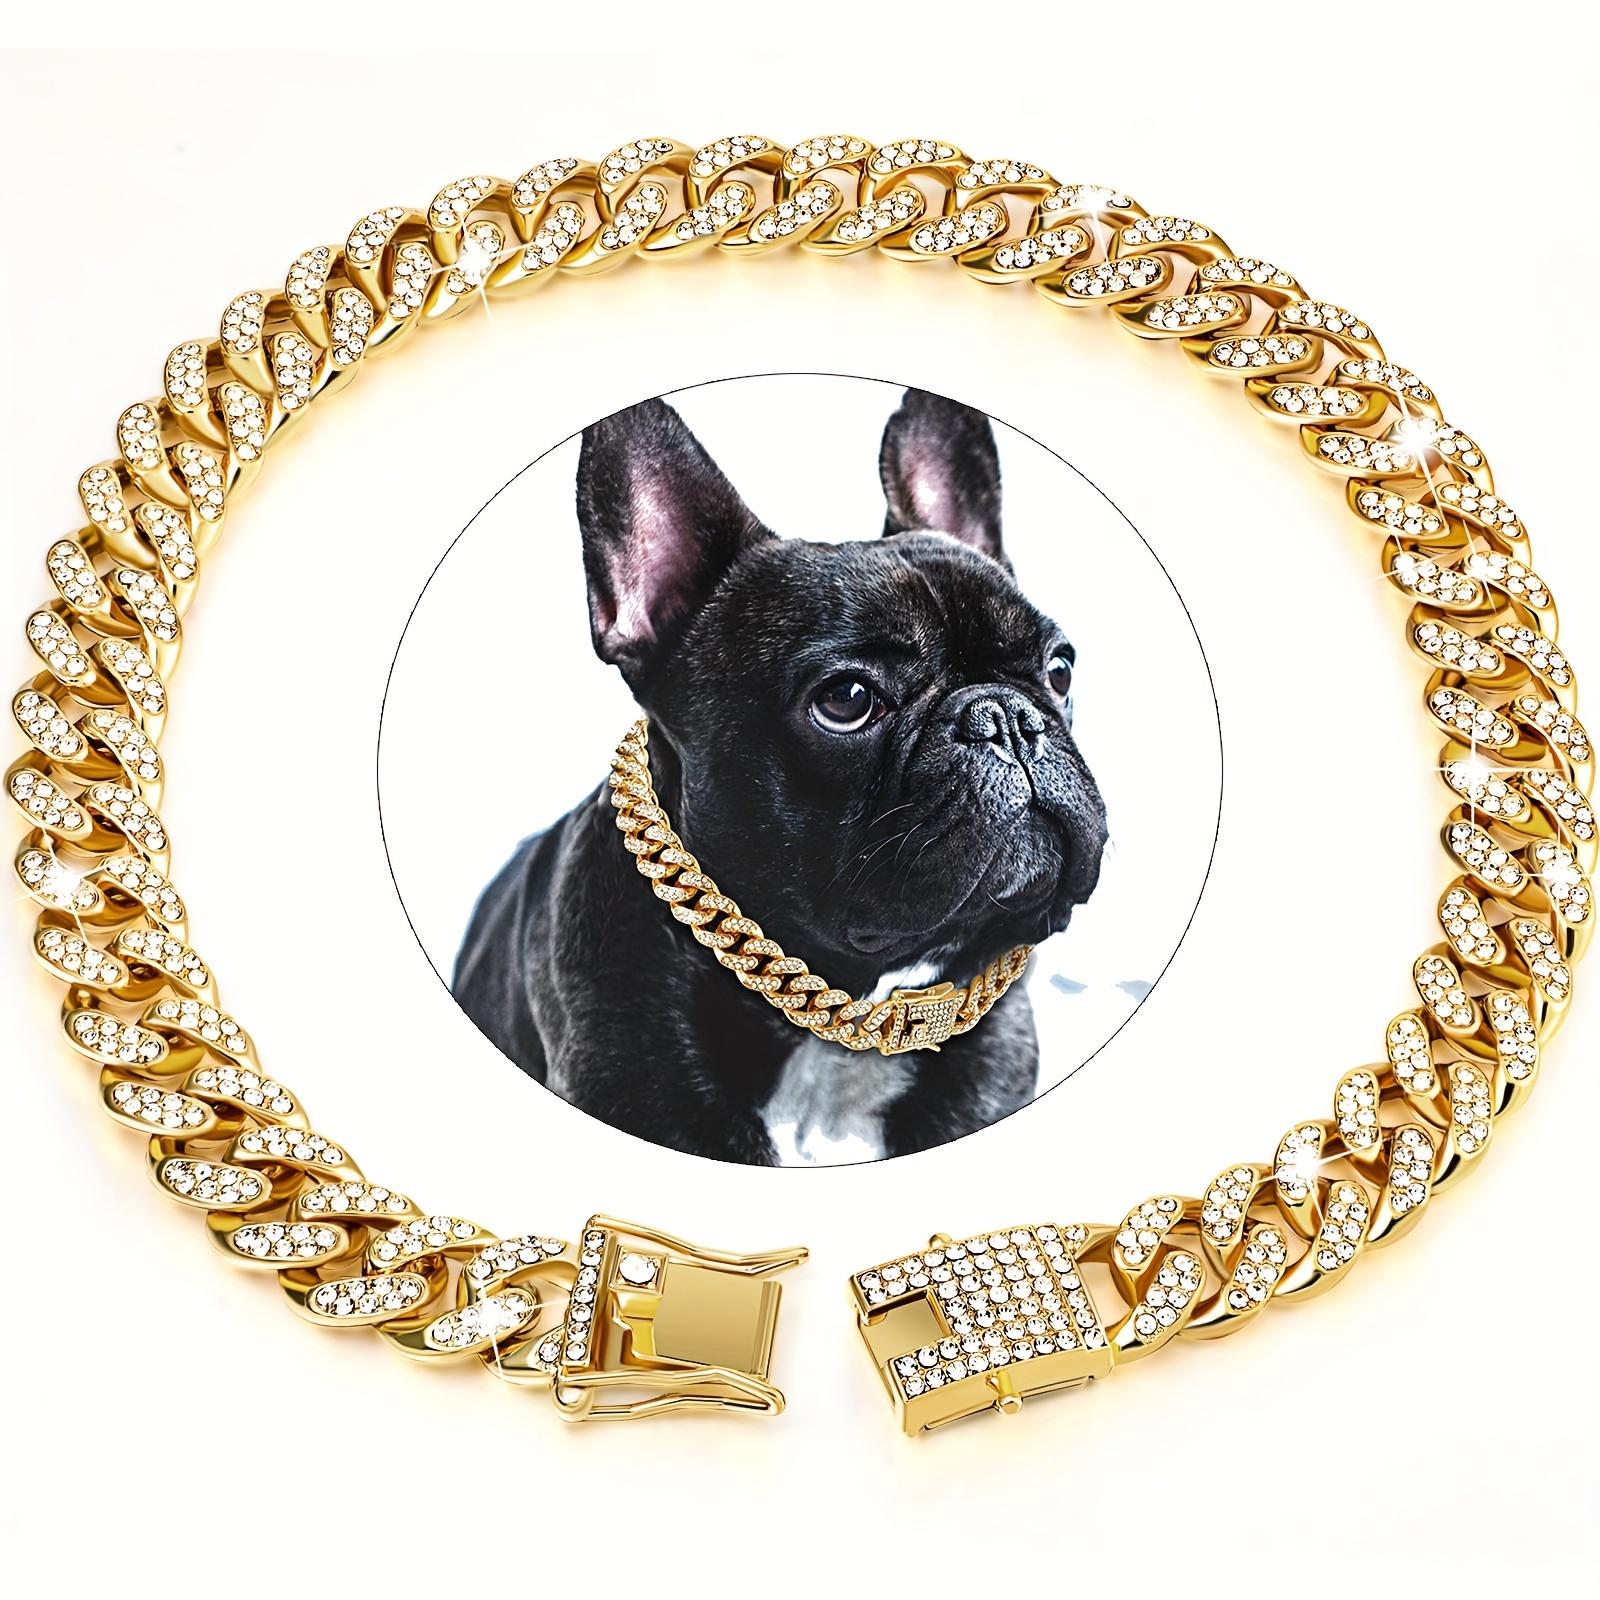 

Cuban Collar Dog Chain With Secure Buckle And Artificial Diamonds - Stylish And Durable Pet Accessory